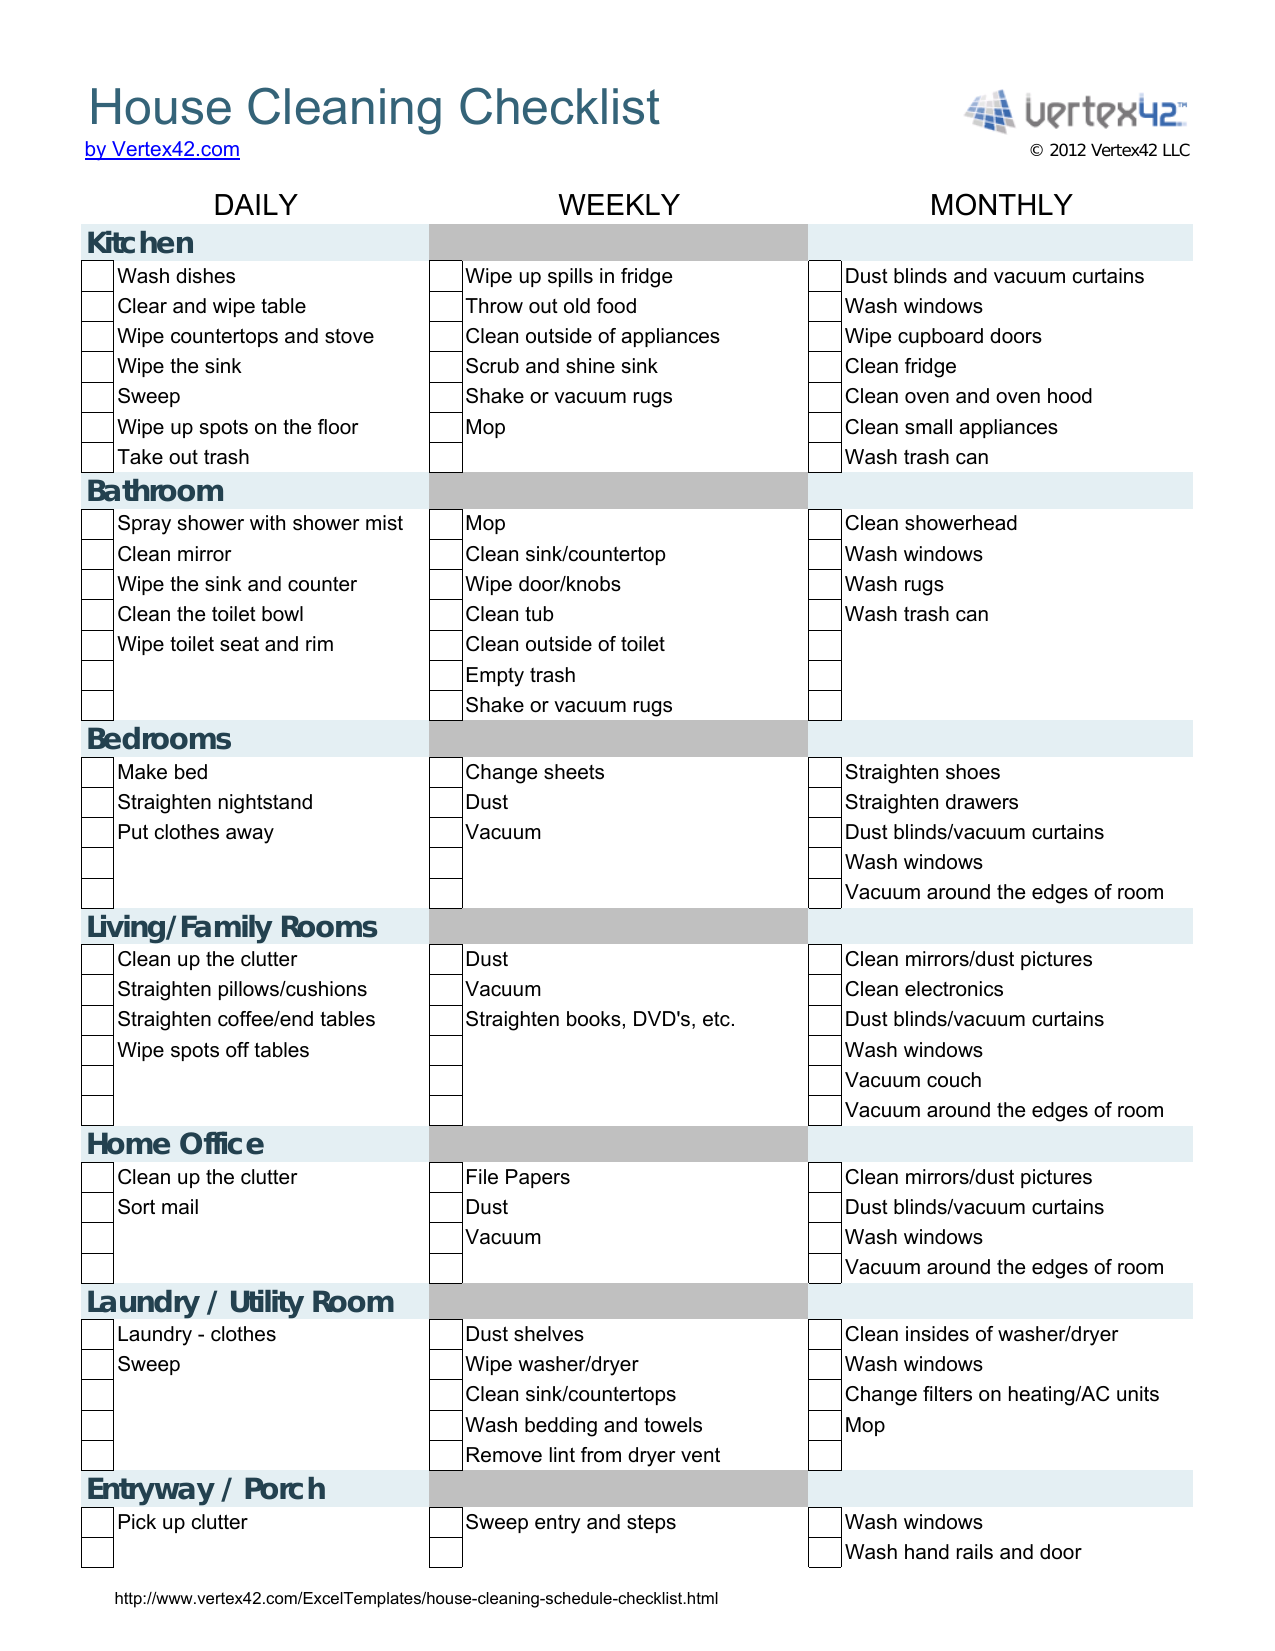 Download House Cleaning Checklist Template  Excel  PDF  RTF  With Regard To Home Cleaning Checklist Template For Home Cleaning Checklist Template